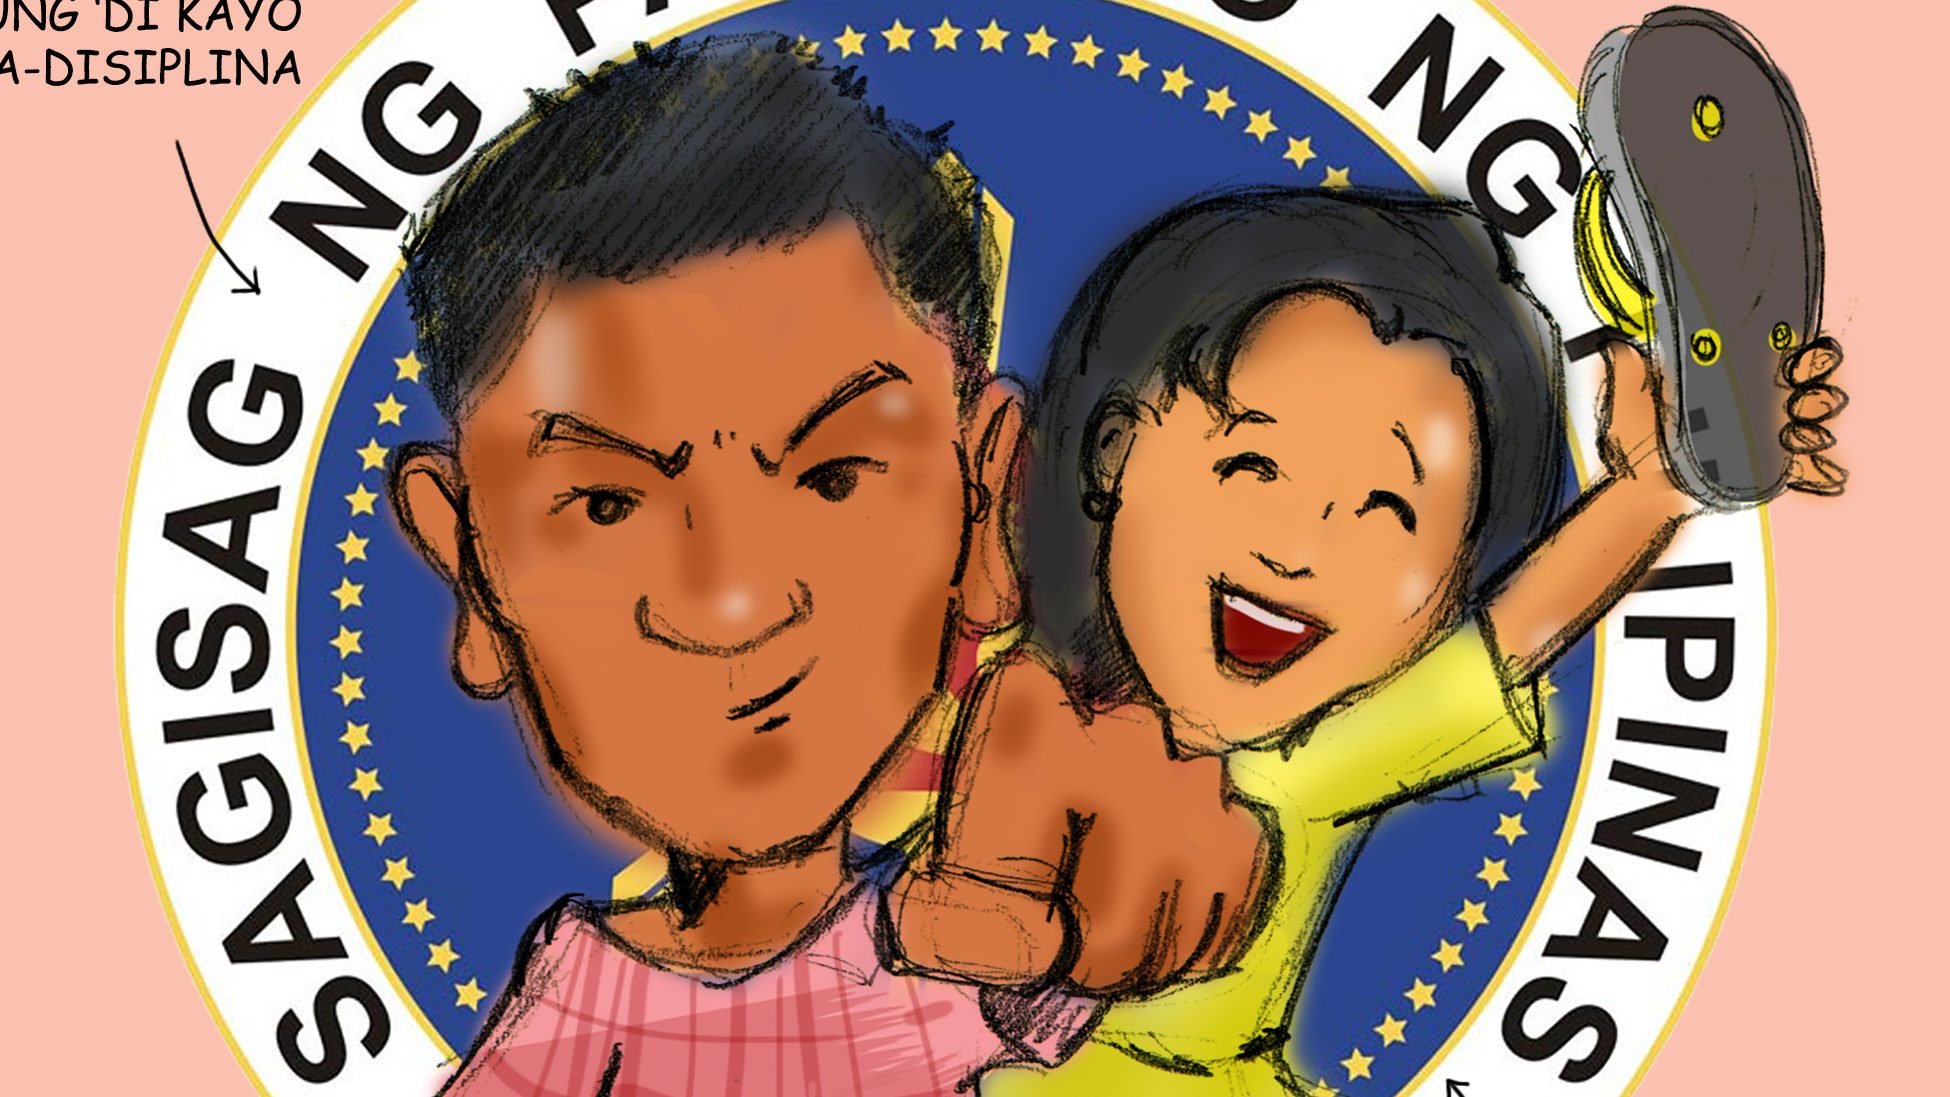 Awesome illustrations of PH politicians encourage good vibes post-elections